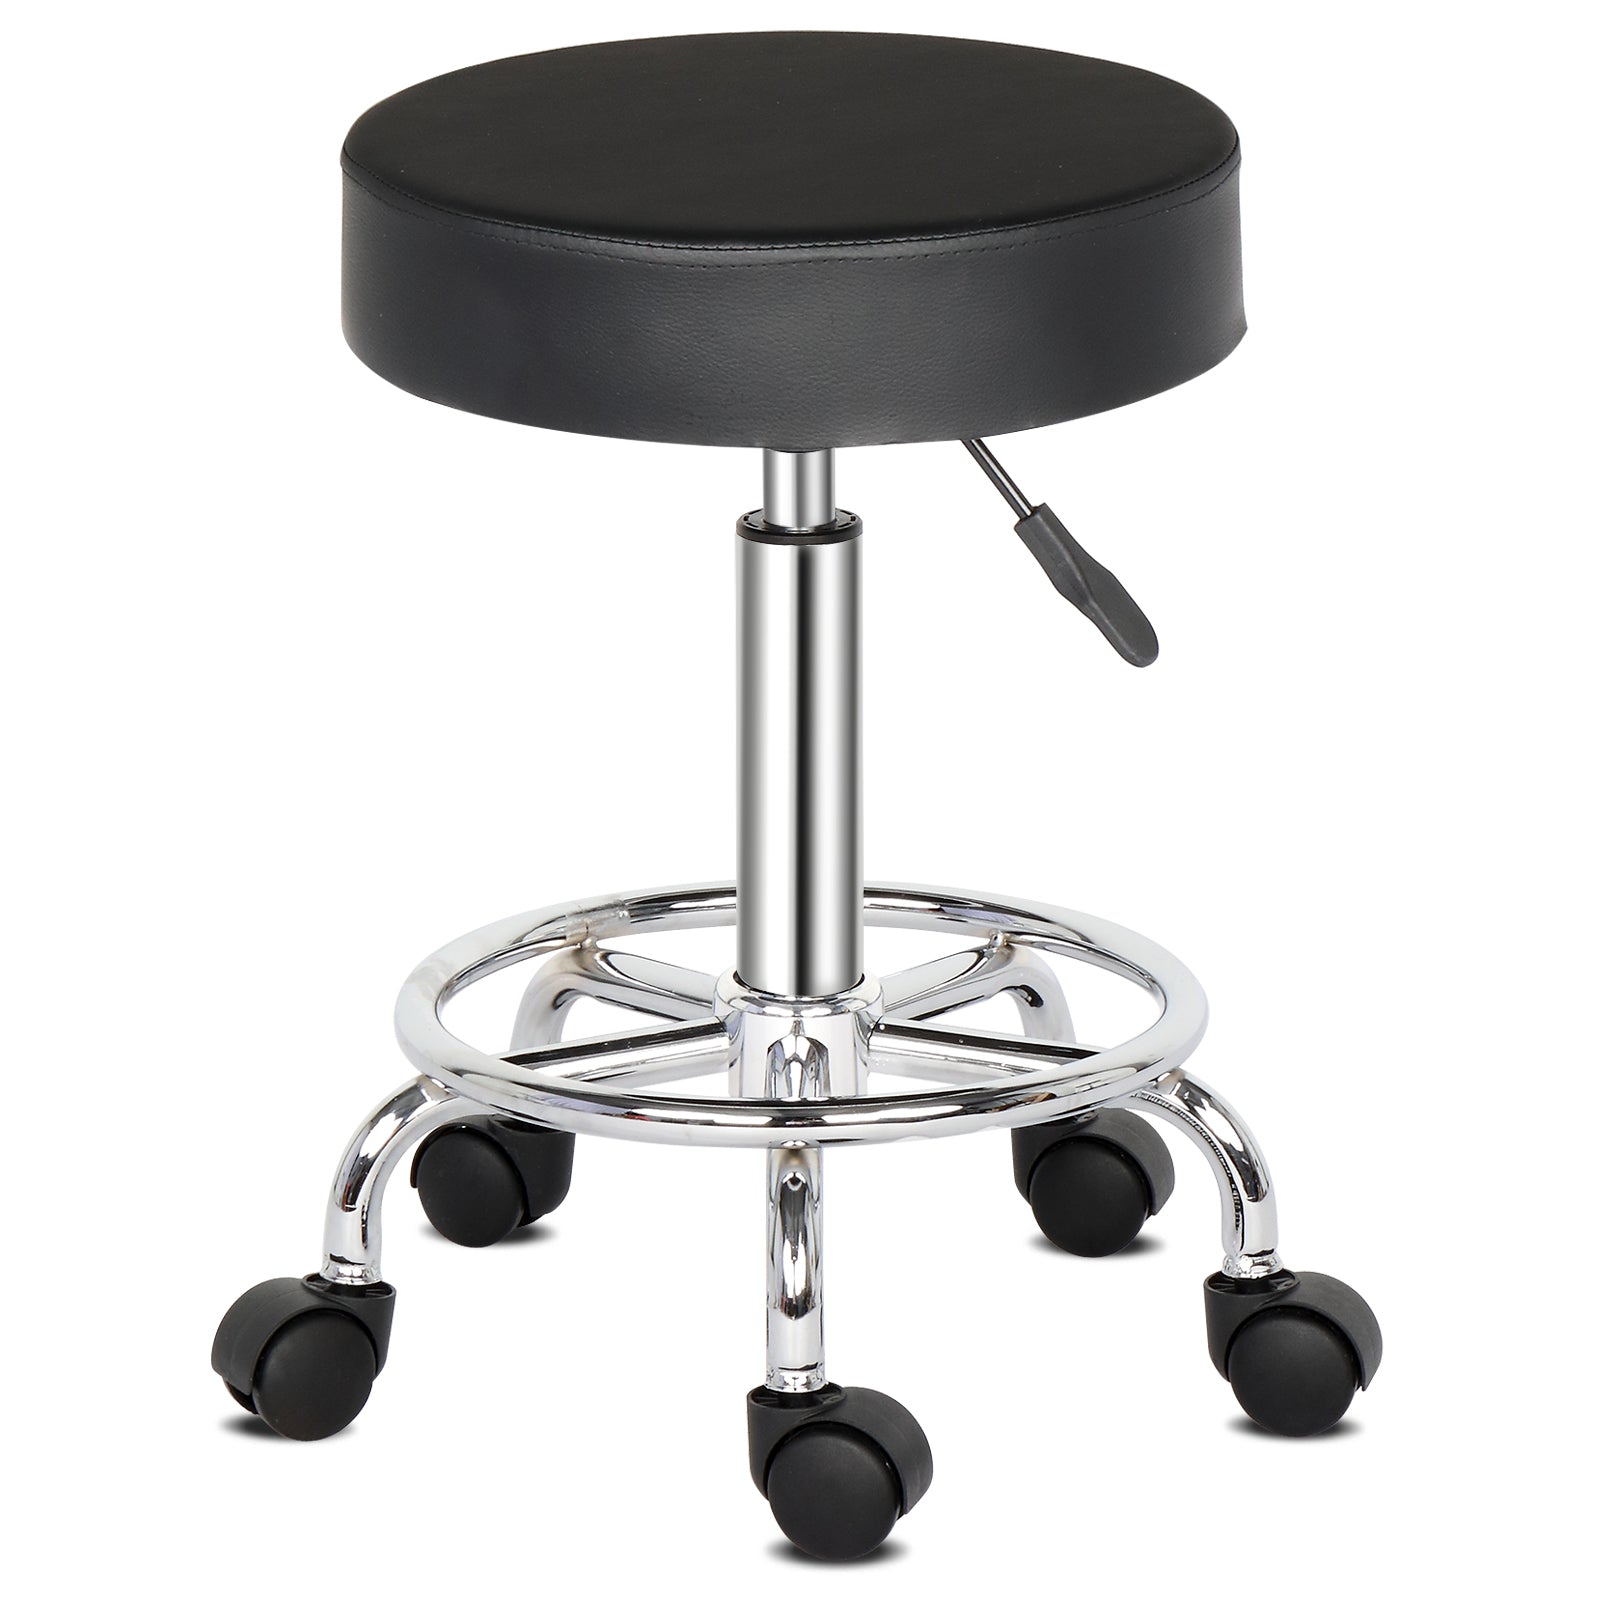 Adjustable PU Leather Round Rolling Stool with Footrest Steel Frame and Wheels for Spa Salon Massage Office Stool Chair - TovaHaus